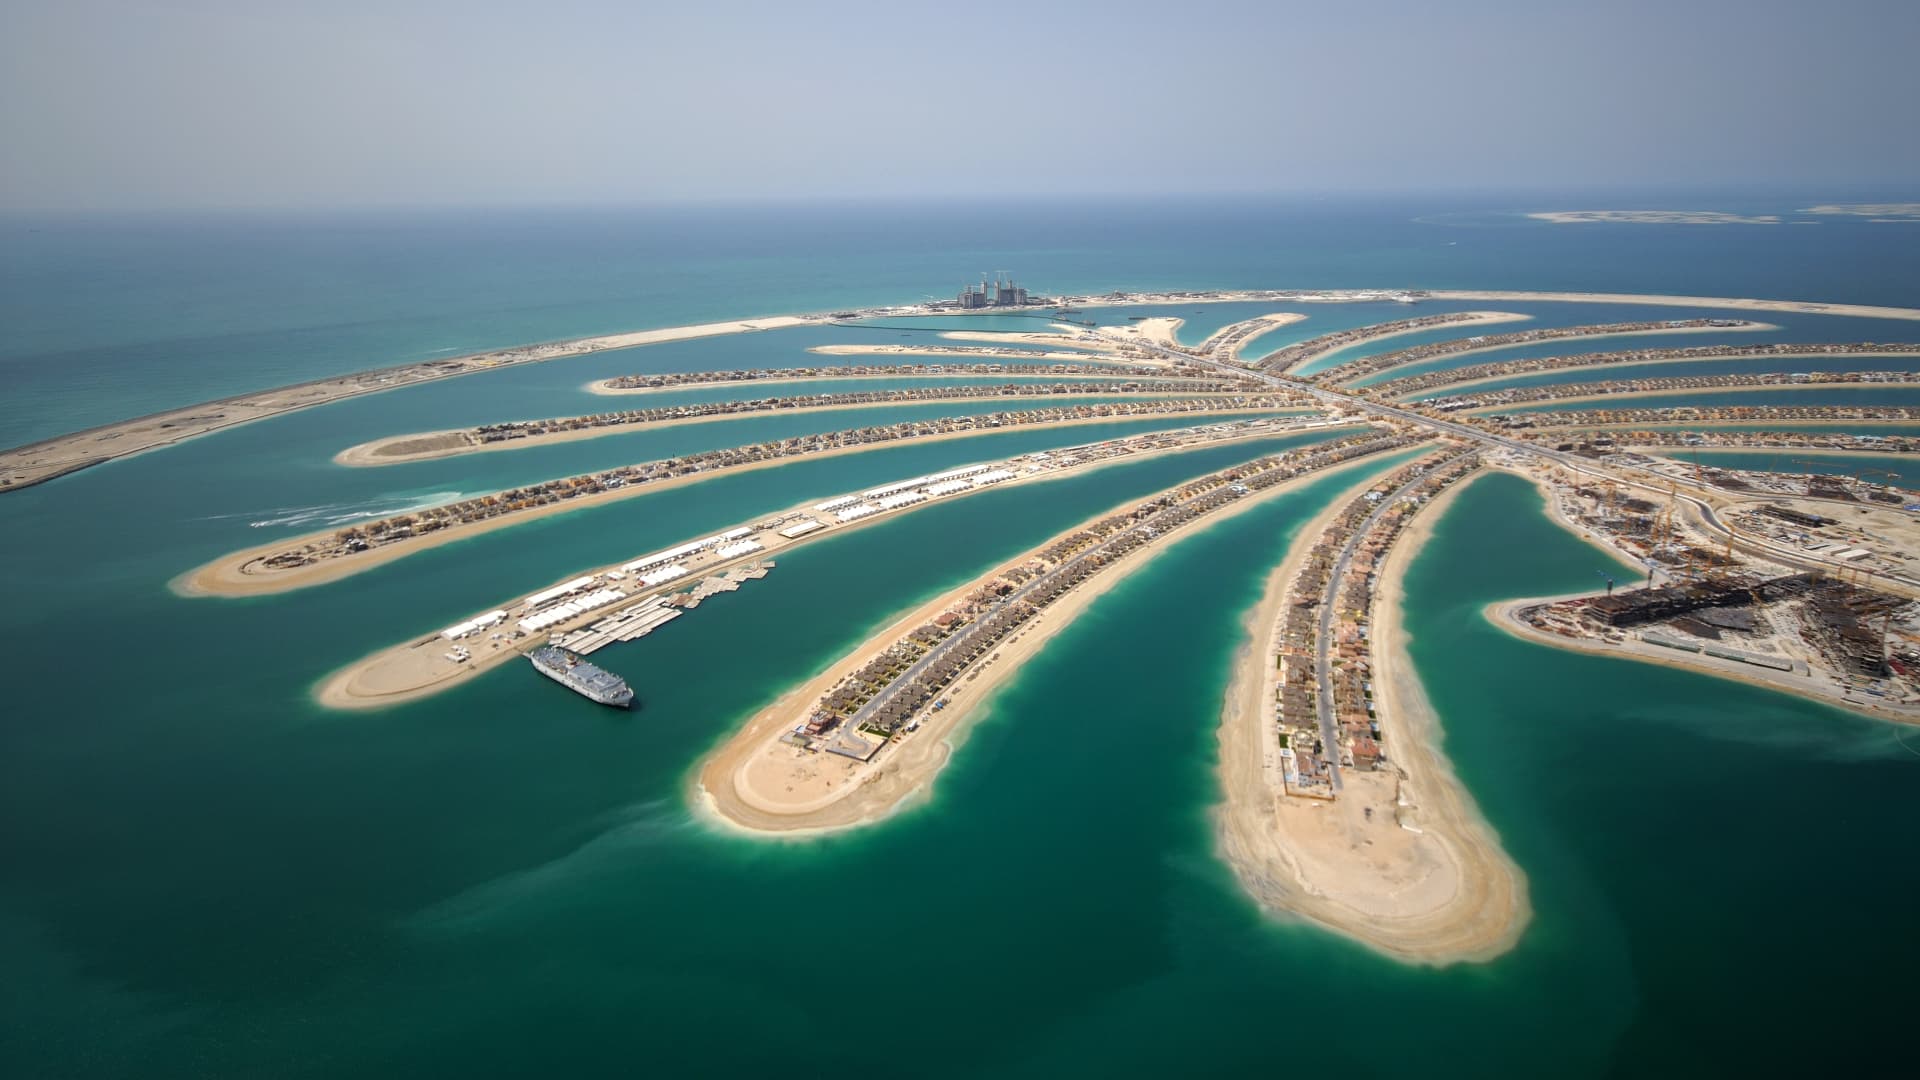 Villas by the sea: Rich Russians fleeing sanctions are pumping up Dubai’s property sector